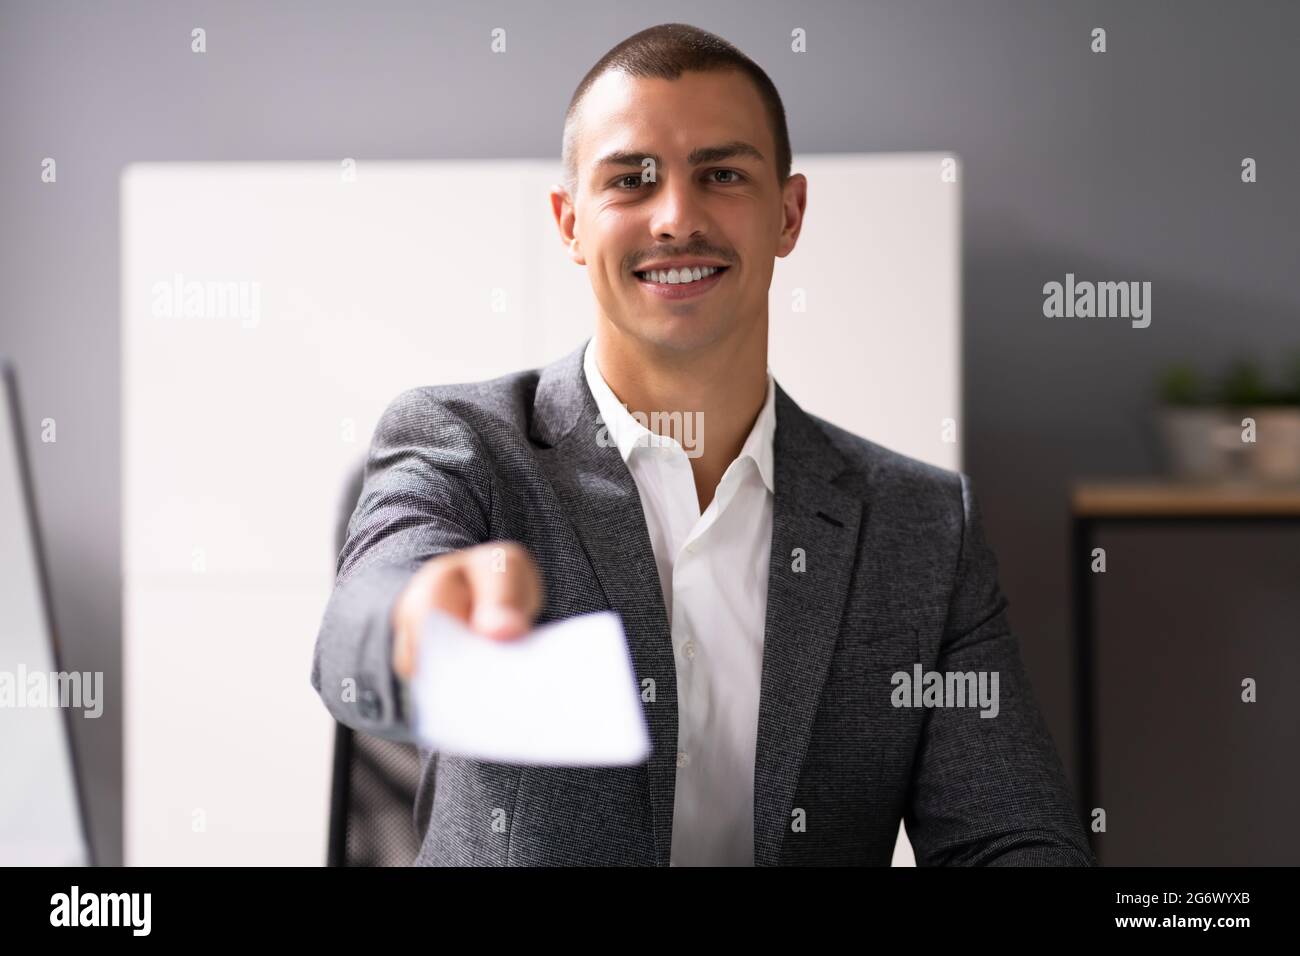 Black Business Man Holding Pay Check Or Paycheck Stock Photo